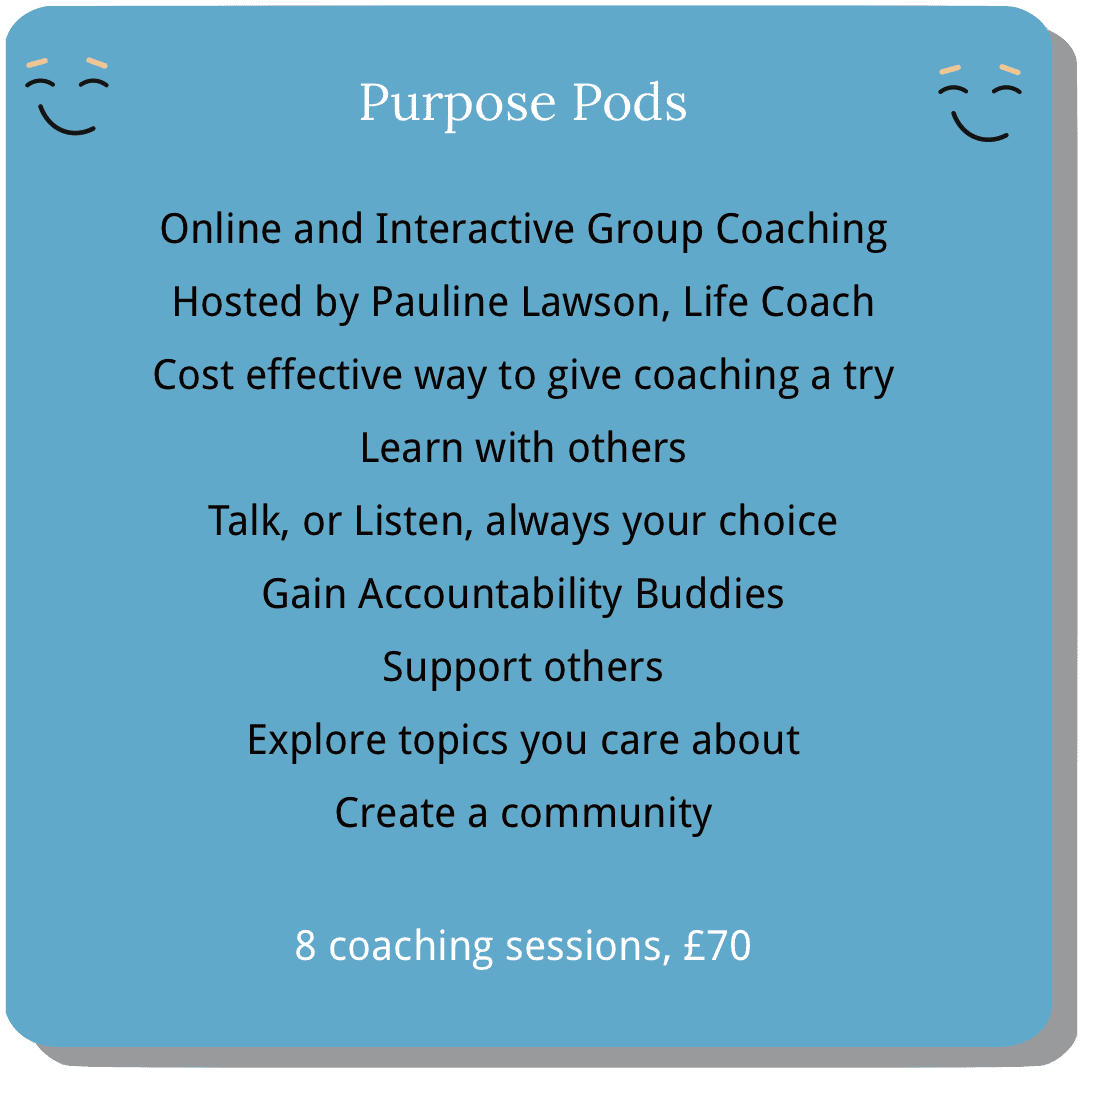 Purpose Pods. Online and interactive Group Coaching for adults.